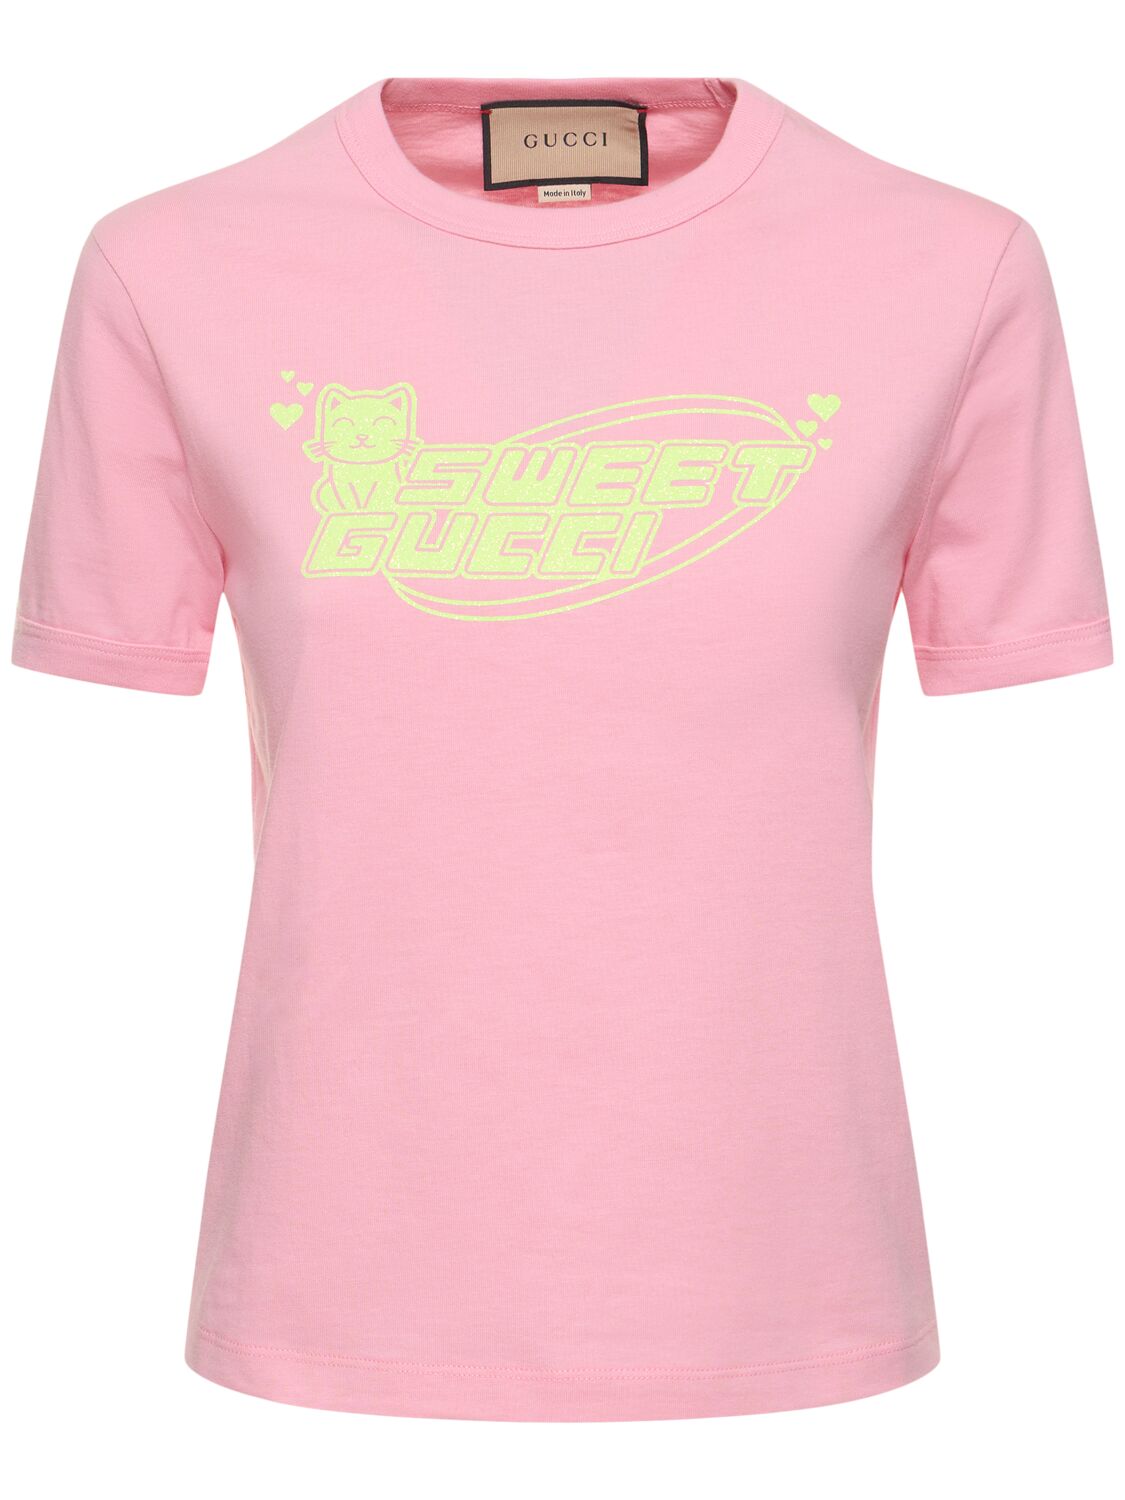 Gucci Cotton Jersey T-shirt In Sugar Pink